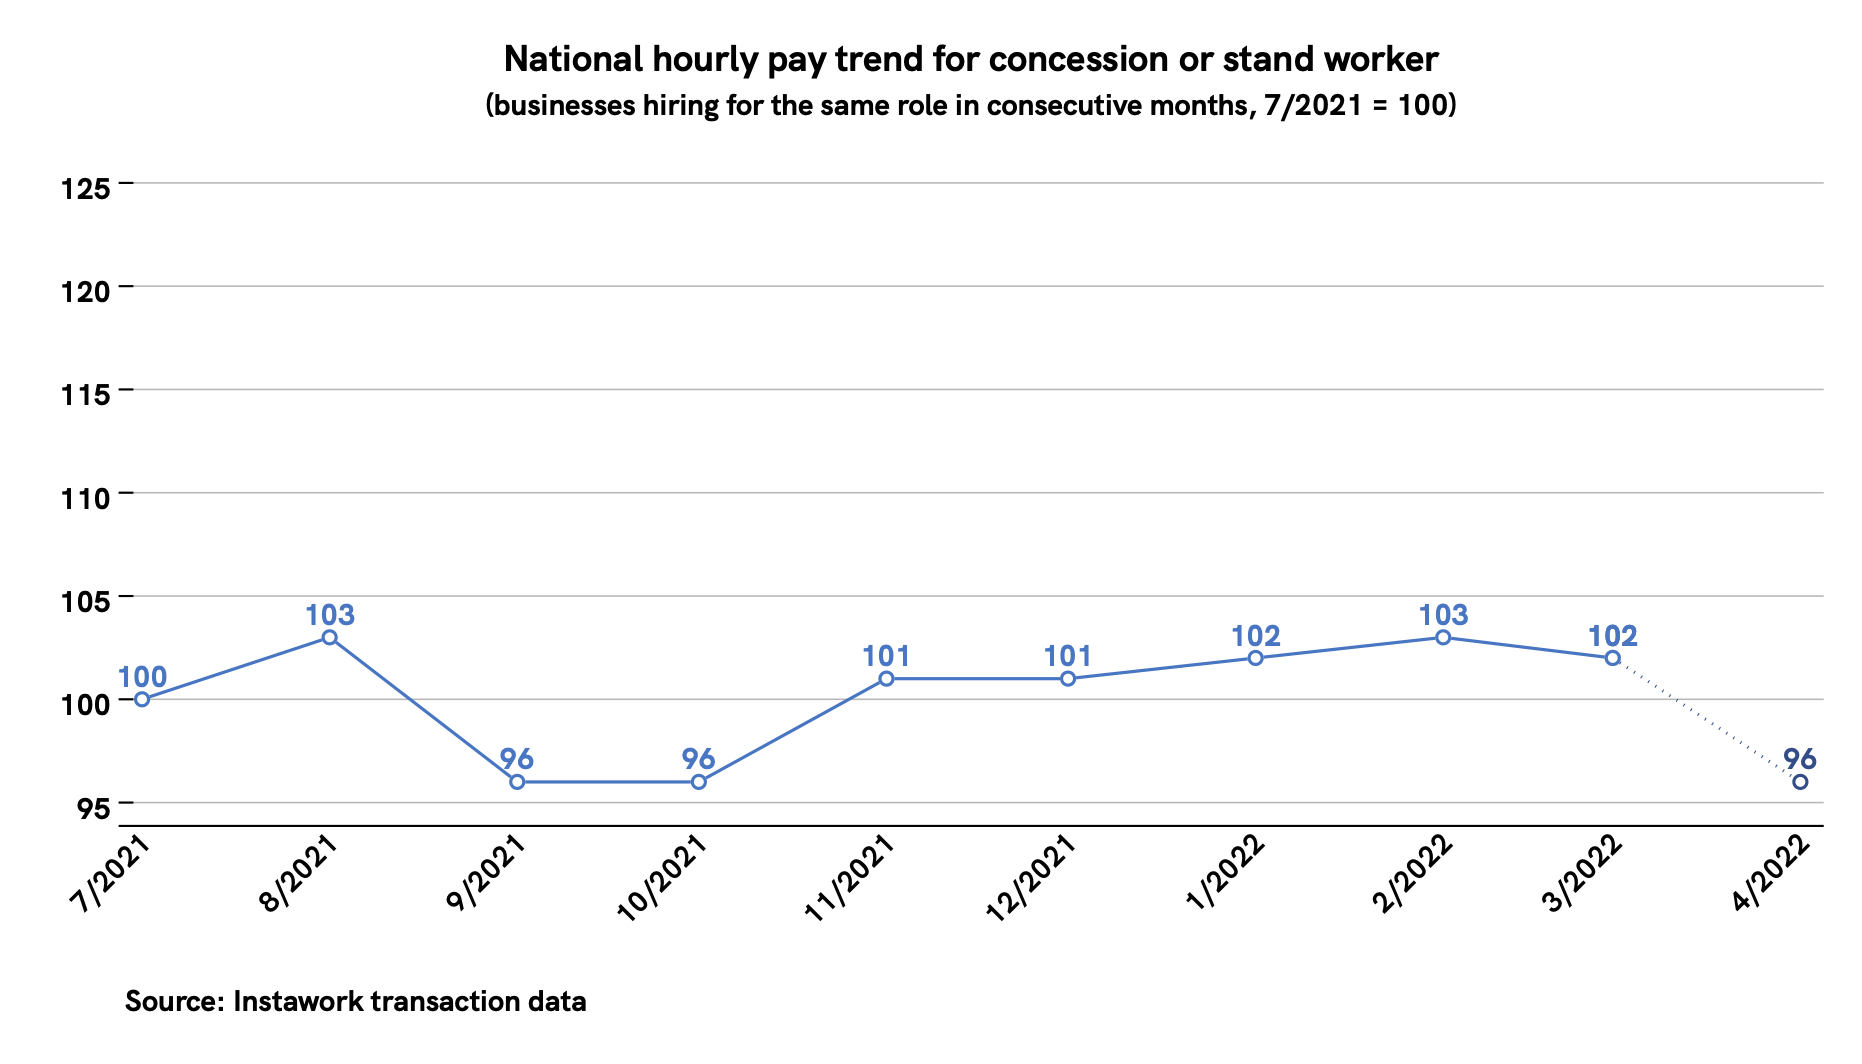 28 Mar 2022 pay trend for concession or stand worker